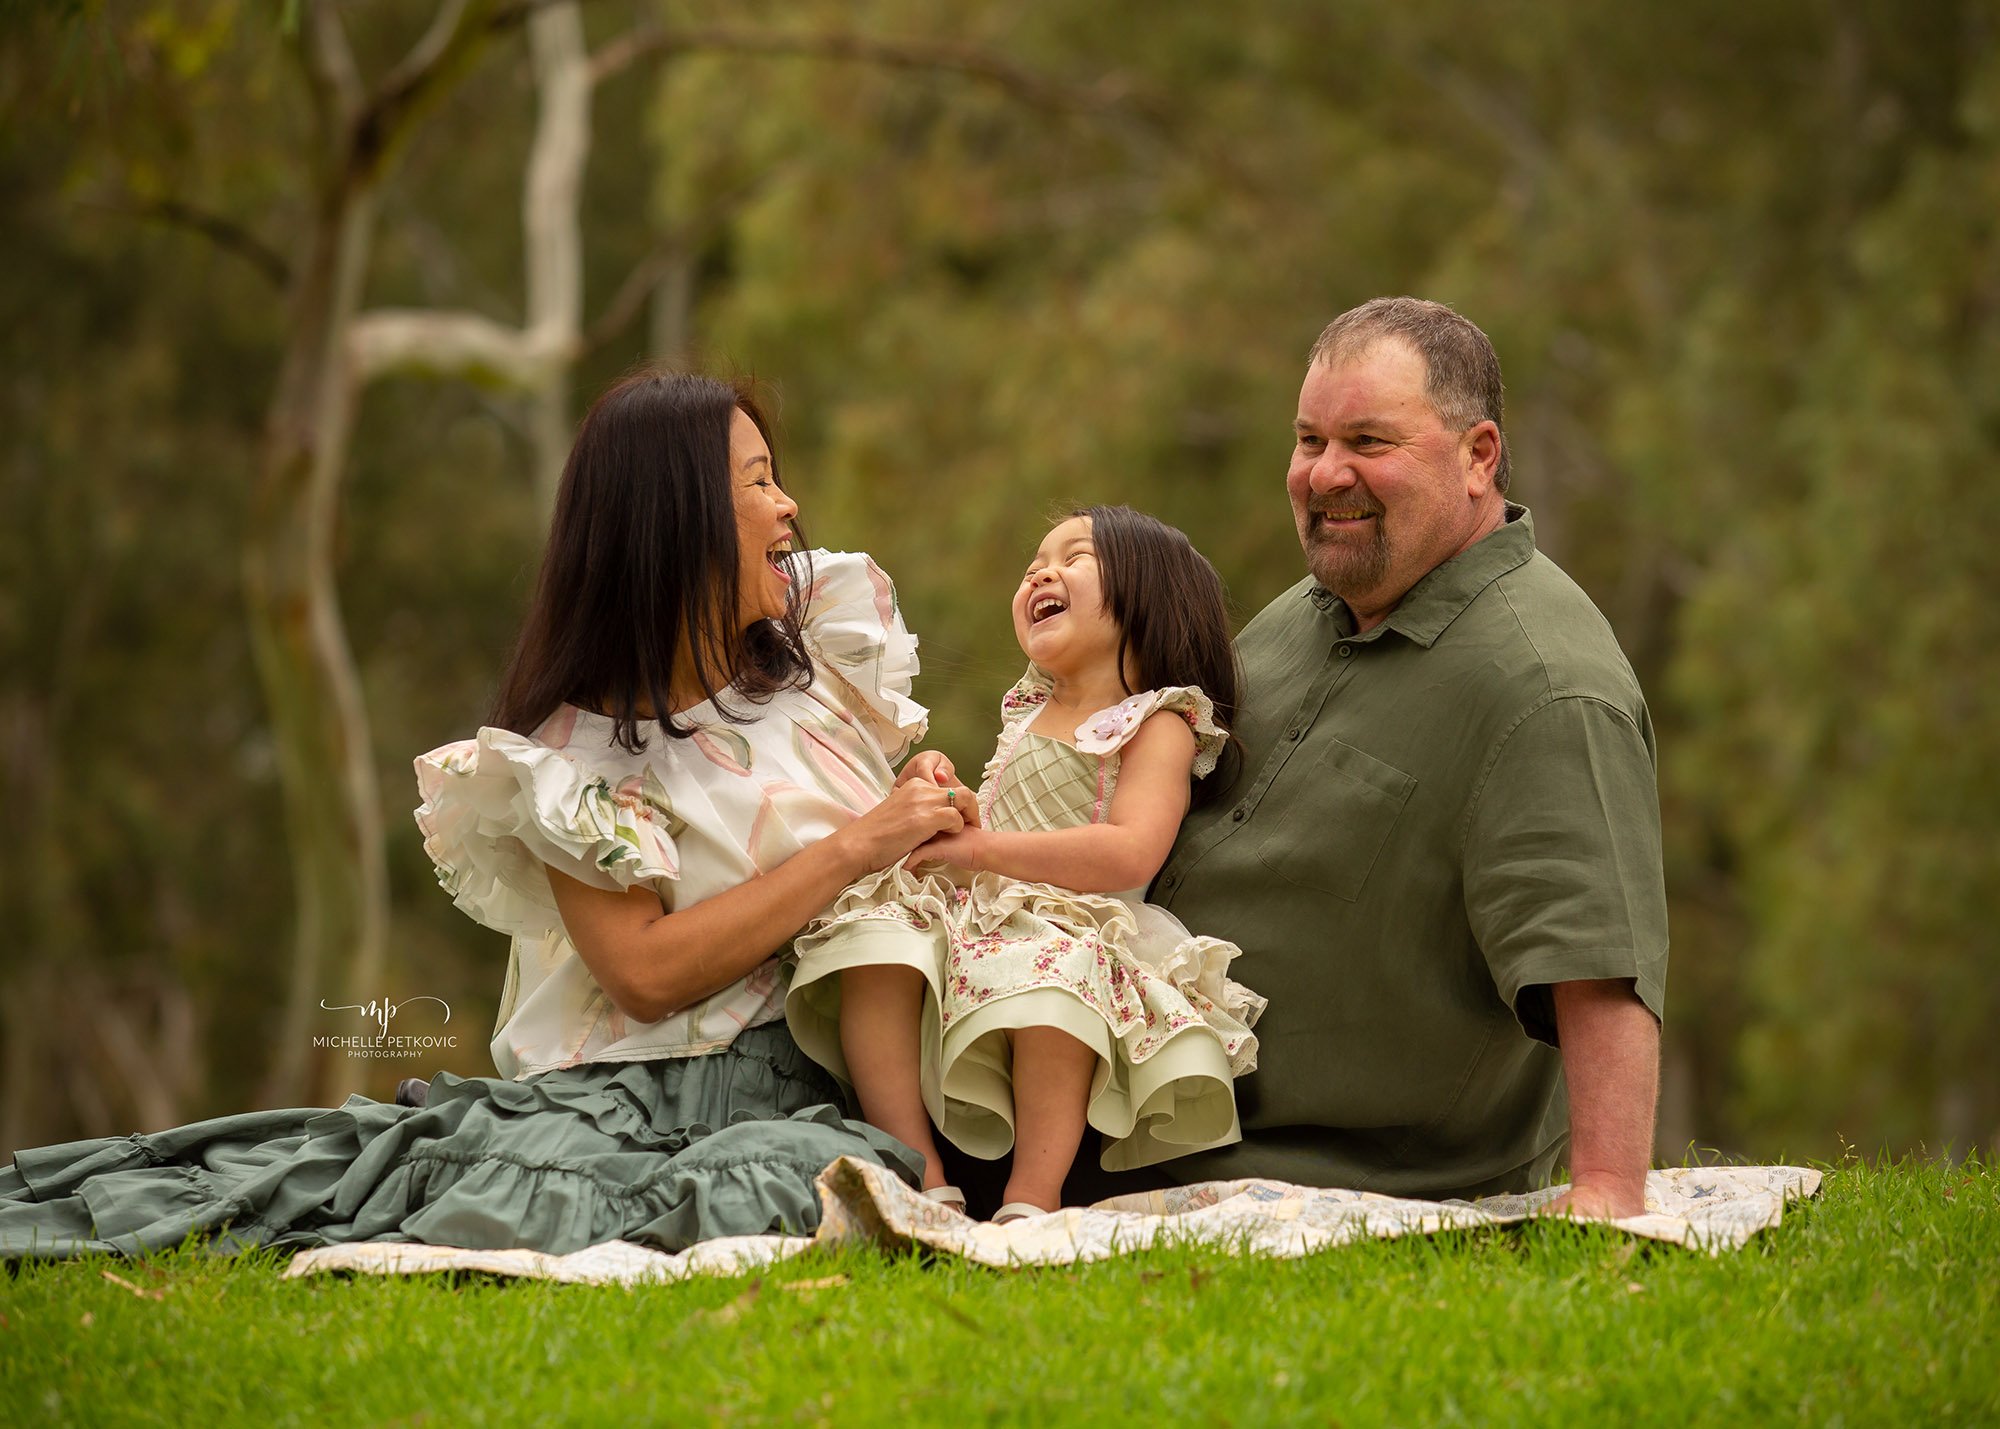 Children and family photography Adelaide -06.jpg